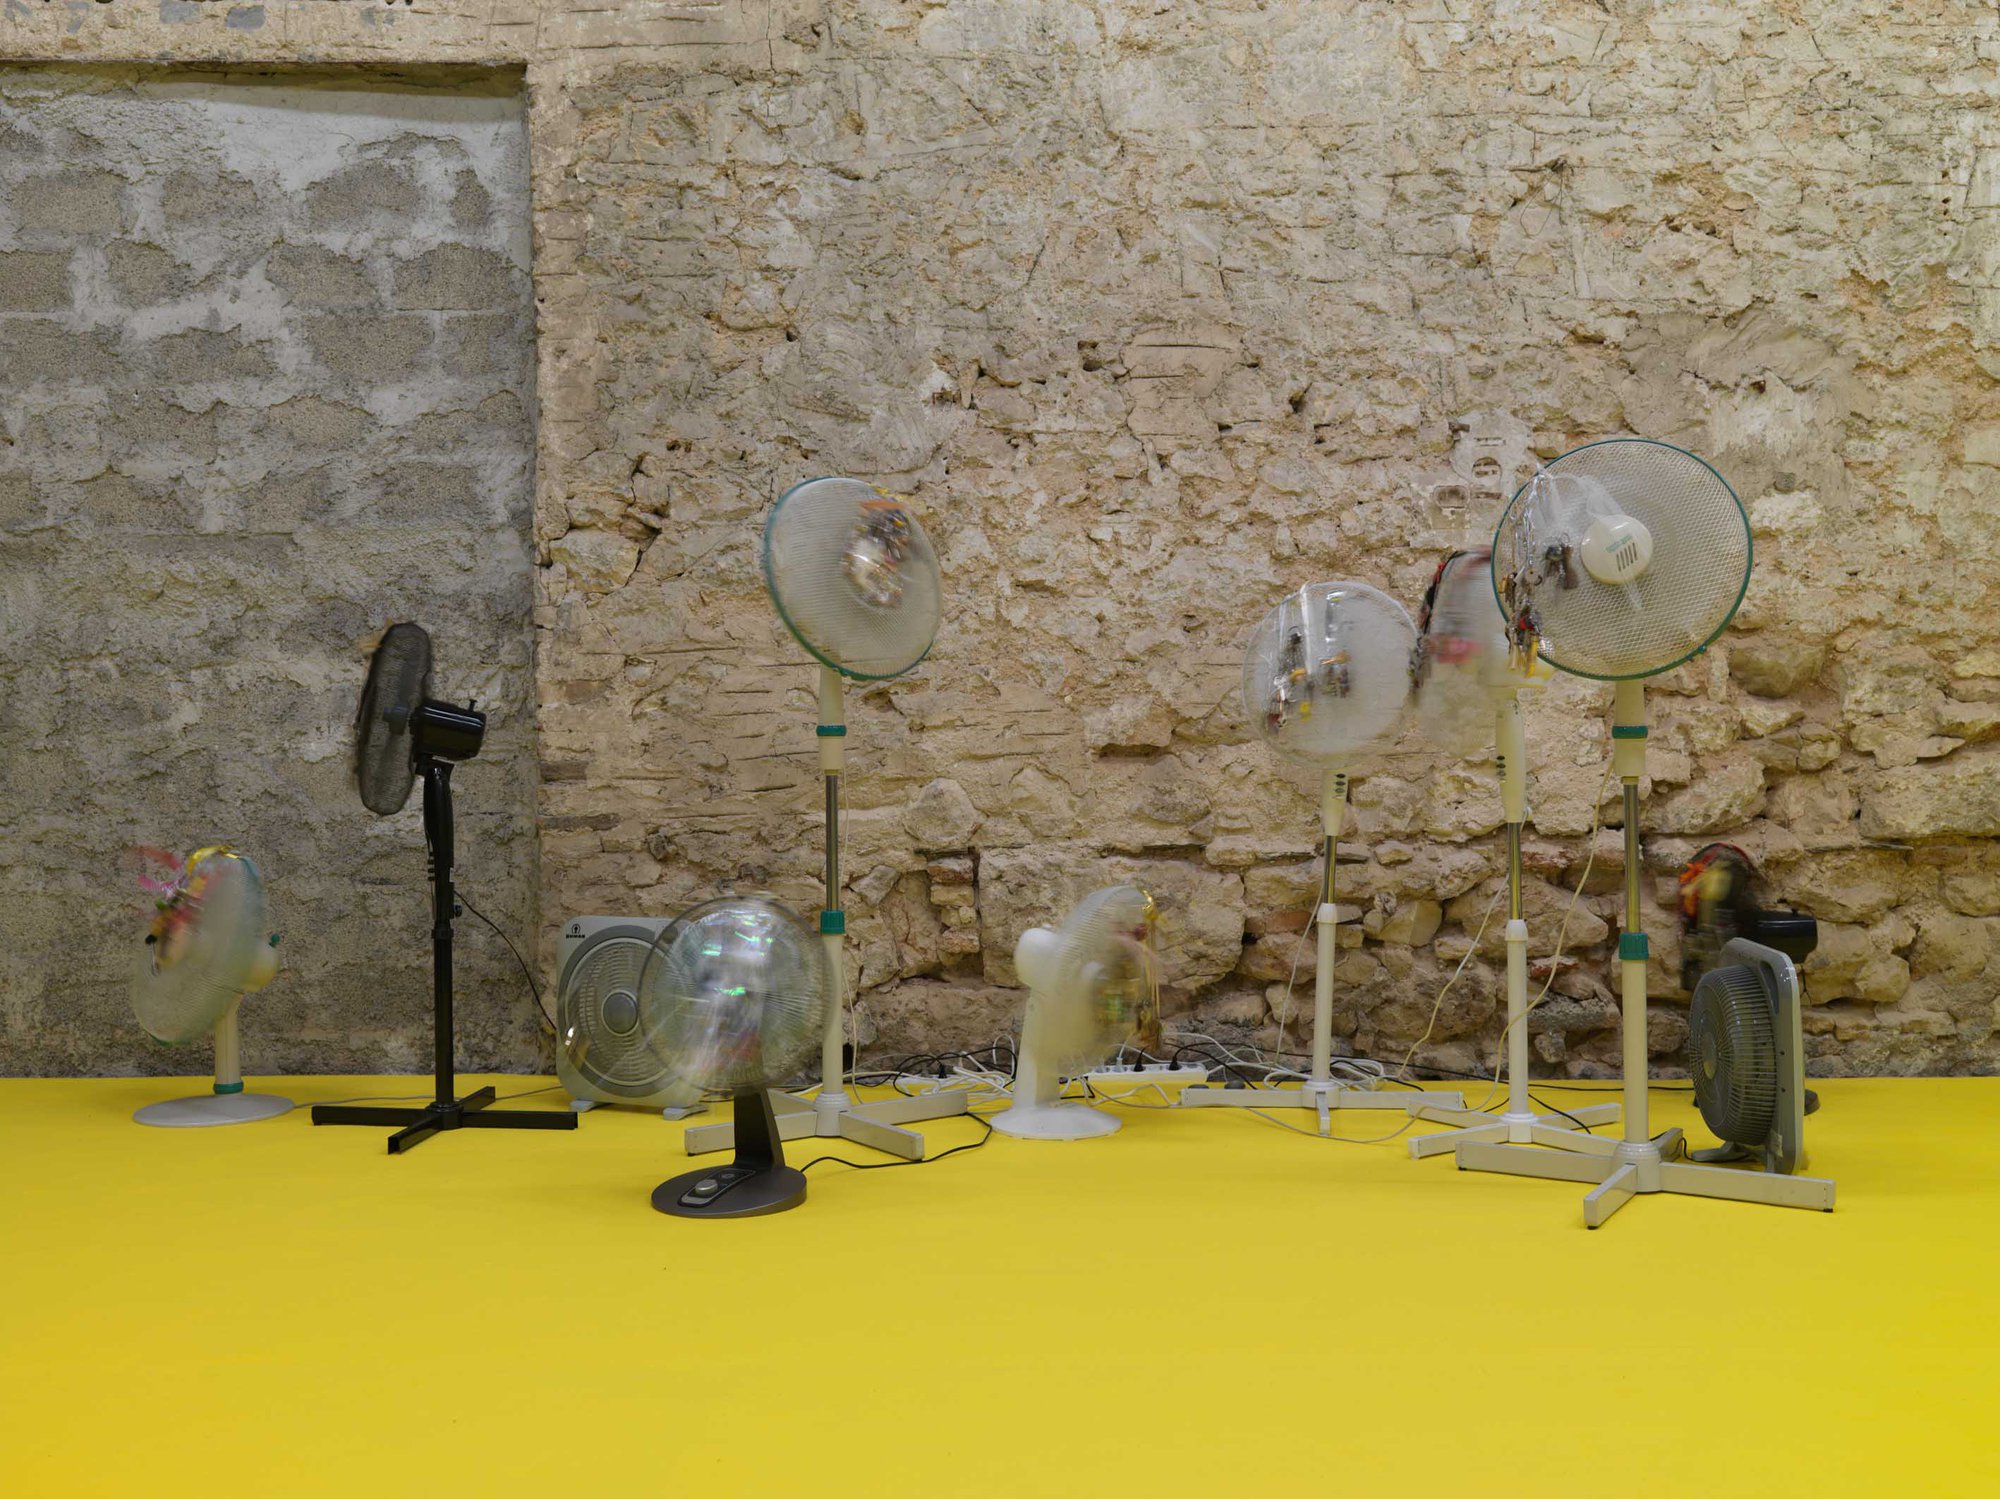 Iris Touliatou, EMOTIONAL INFINITY (THE SOUND OF THEM COMING BACK AMPLIFIED AND LOOPED), oscillating fans, duplicated house keys, pre owned keychains, string, ribbons, gift bows, wire, timers, multiplugs, outlets, dimensions variable, 2022.Installation view, anabasis*, Rodeo, Piraeus, 2022.